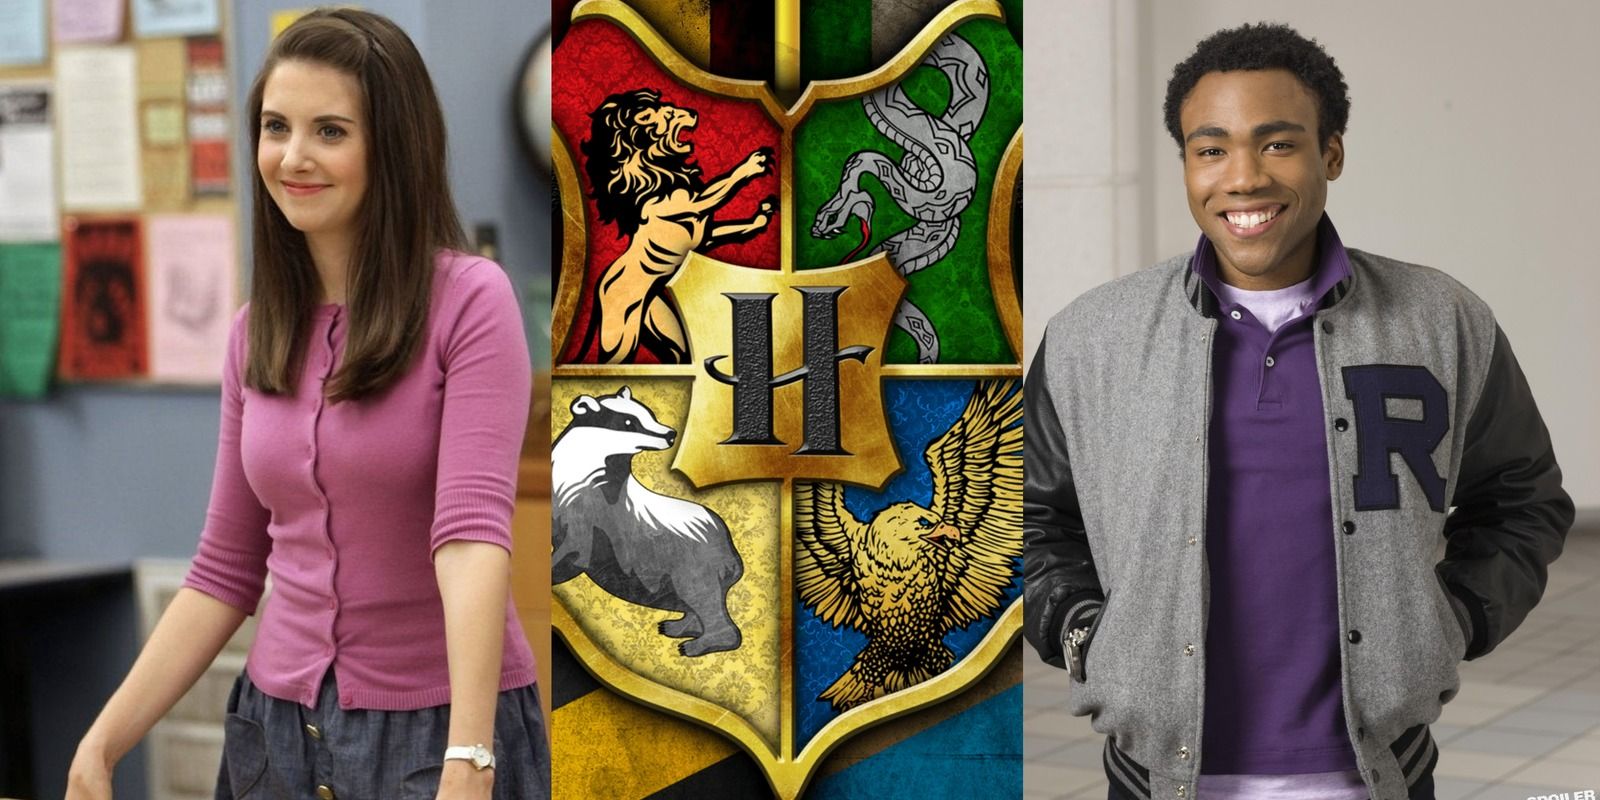 Community's Annie and Troy with the Hogwarts House logo in the center